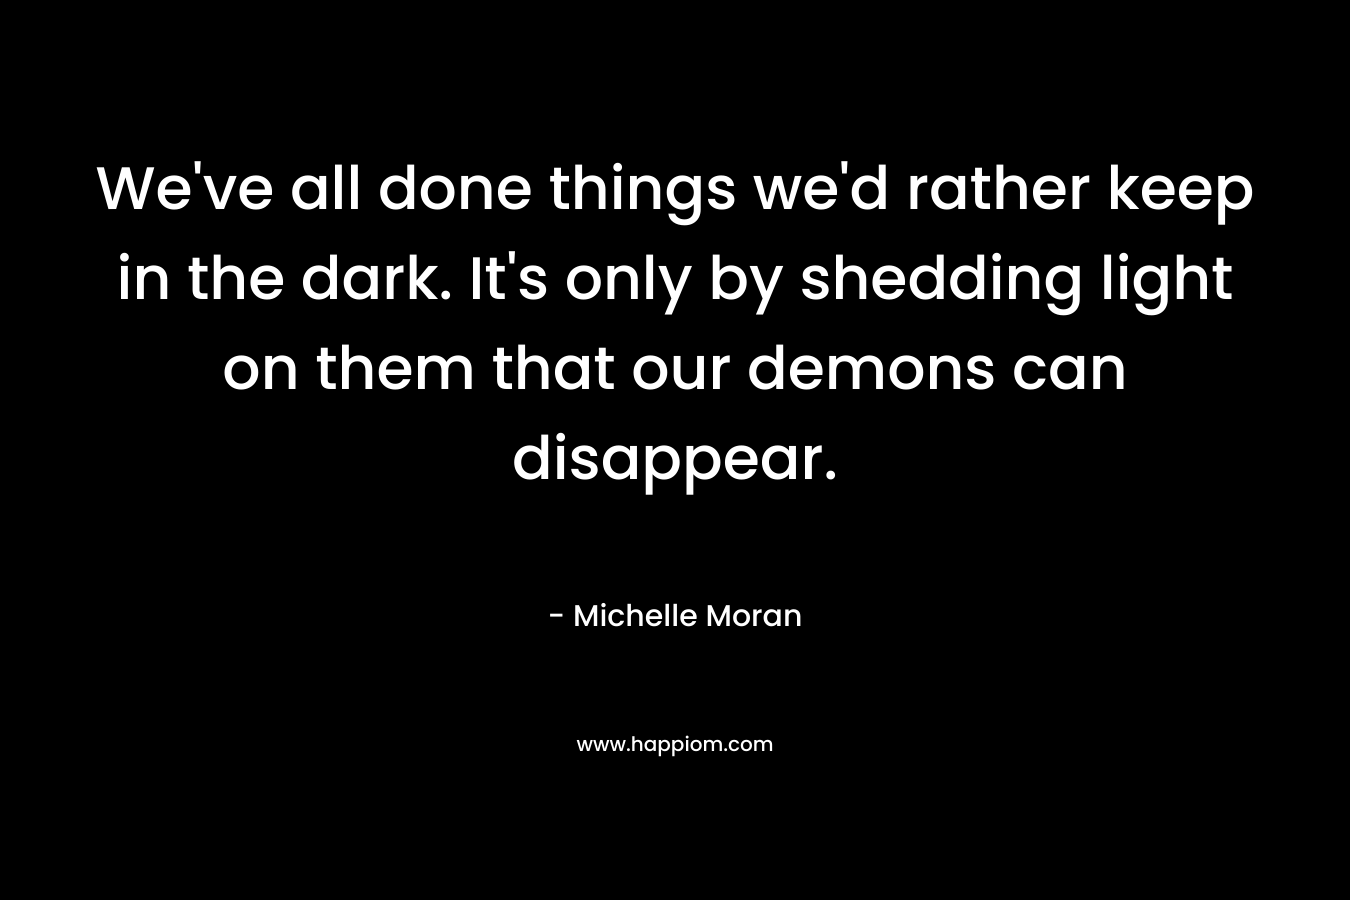 We’ve all done things we’d rather keep in the dark. It’s only by shedding light on them that our demons can disappear. – Michelle Moran